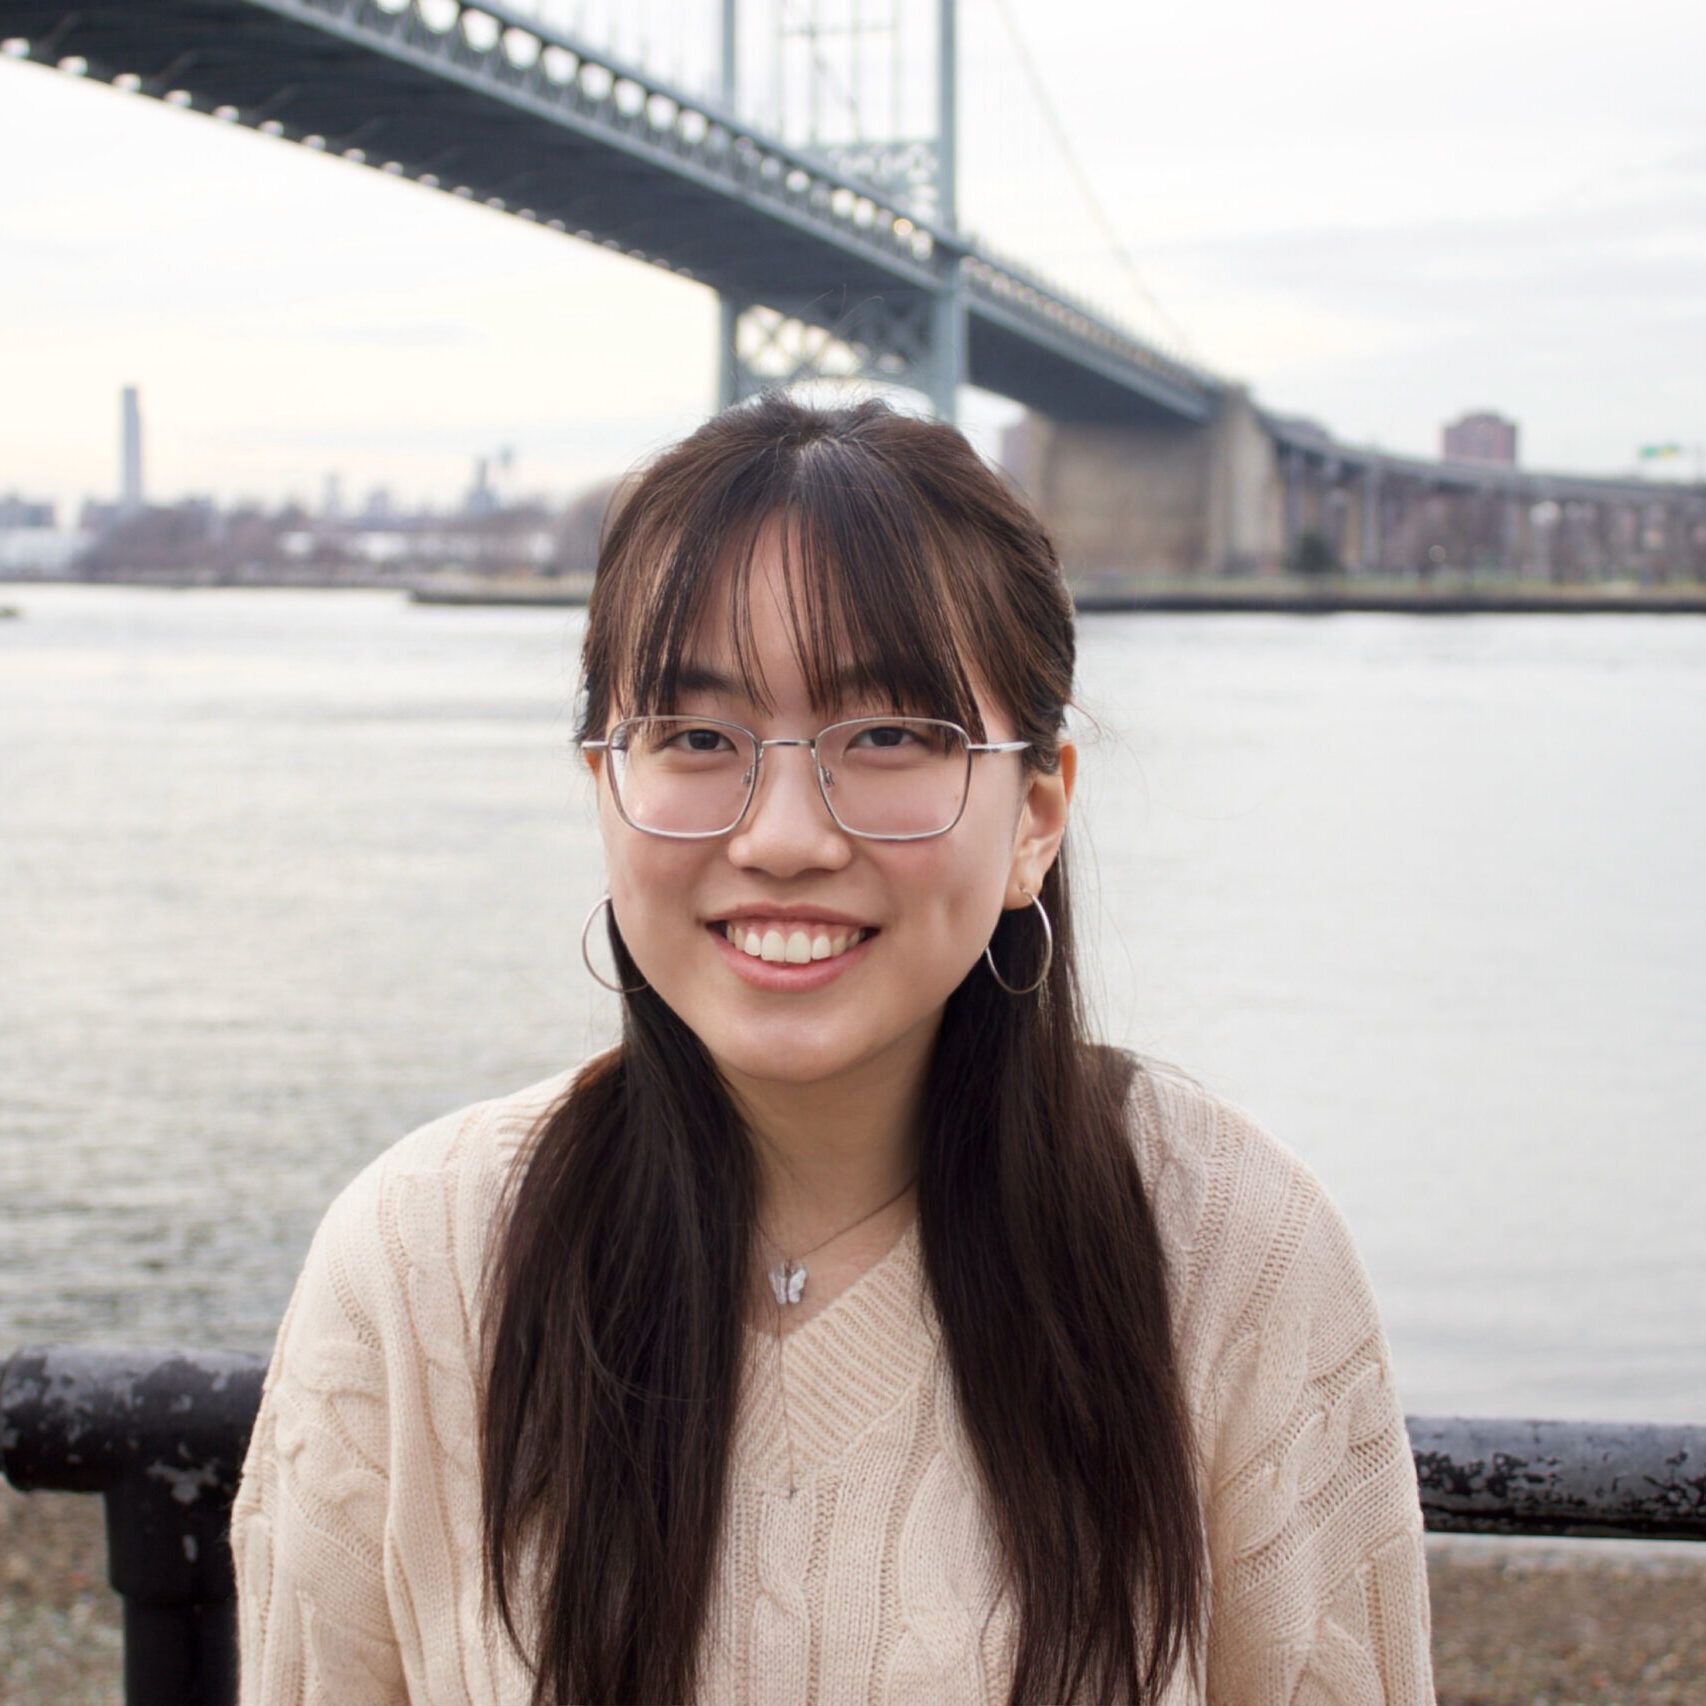 Asian person with glasses and long brown hair standing in front of a riverfront and bridge.